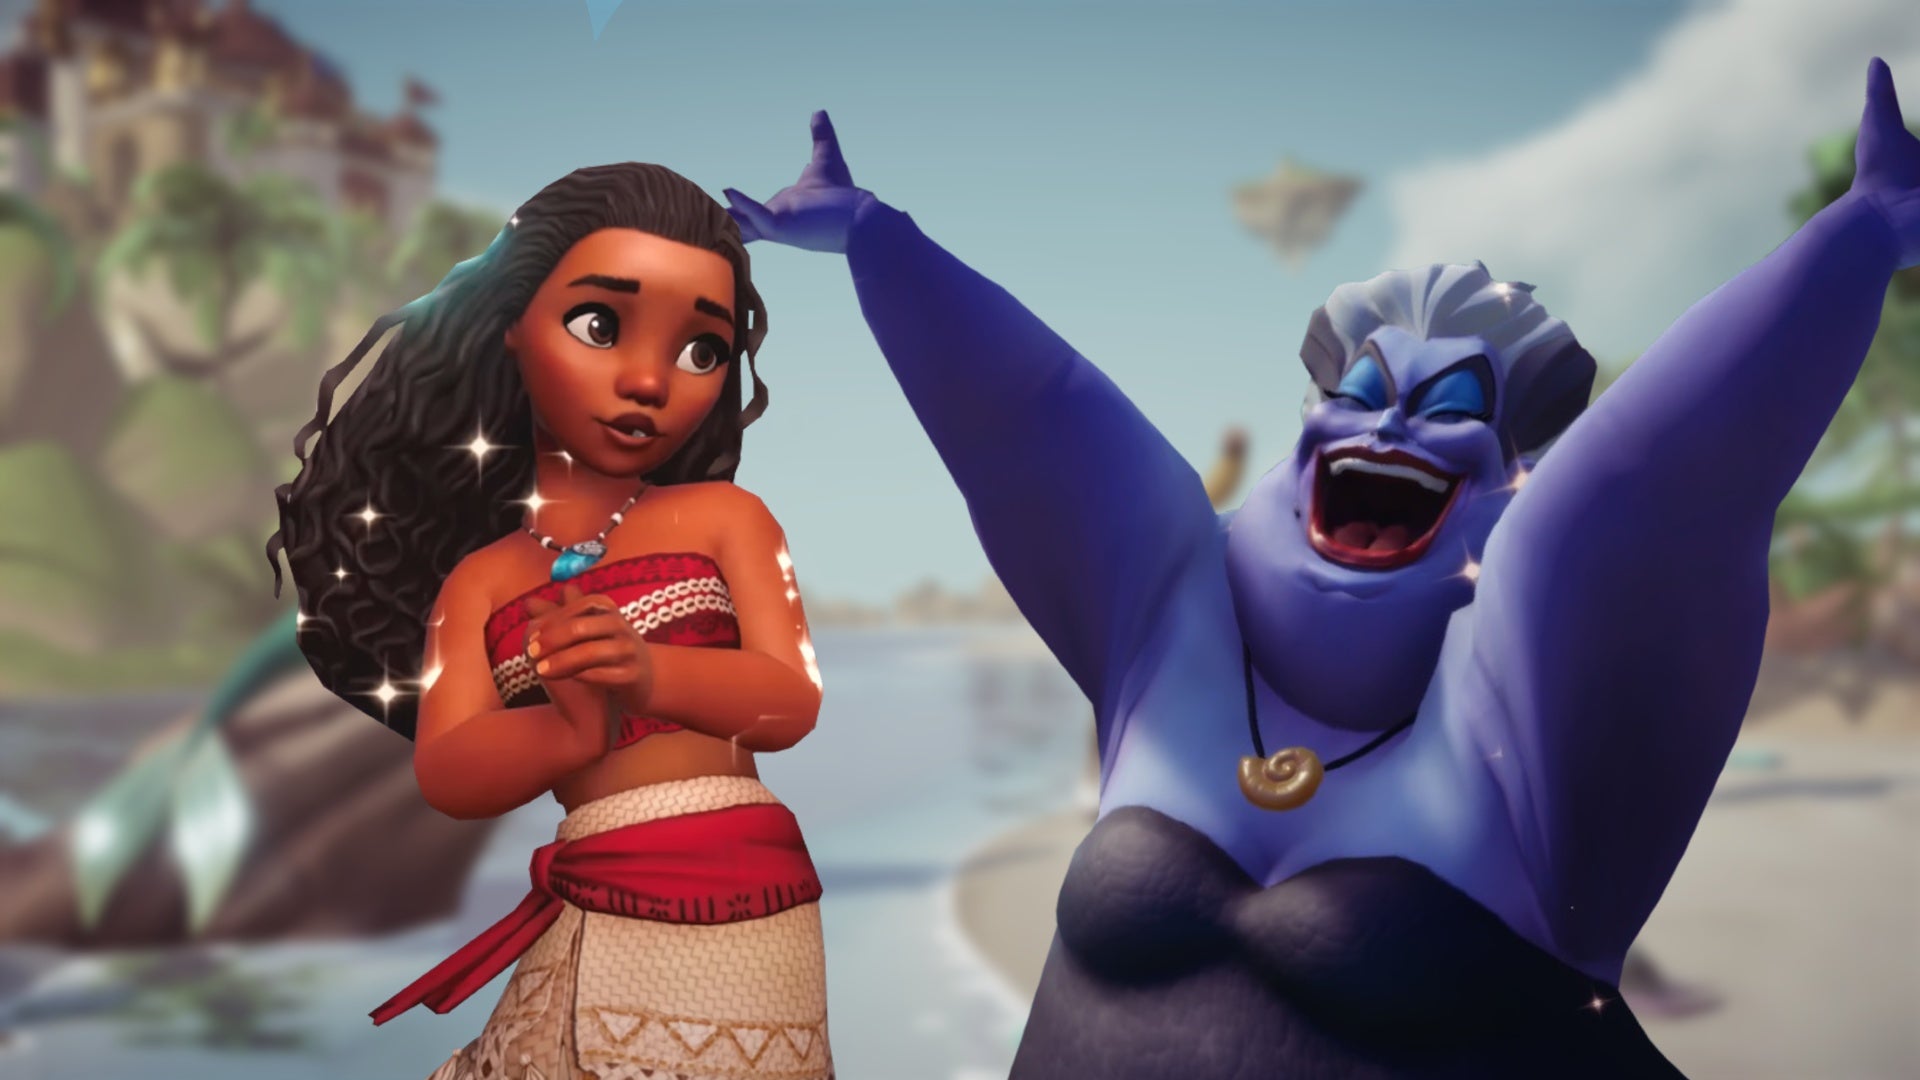 Image showing Moana and Ursula from Disney Dreamlight Valley against a blurred backdrop of a beach. Moana has her hands clasped and stares at a cheering Ursula.